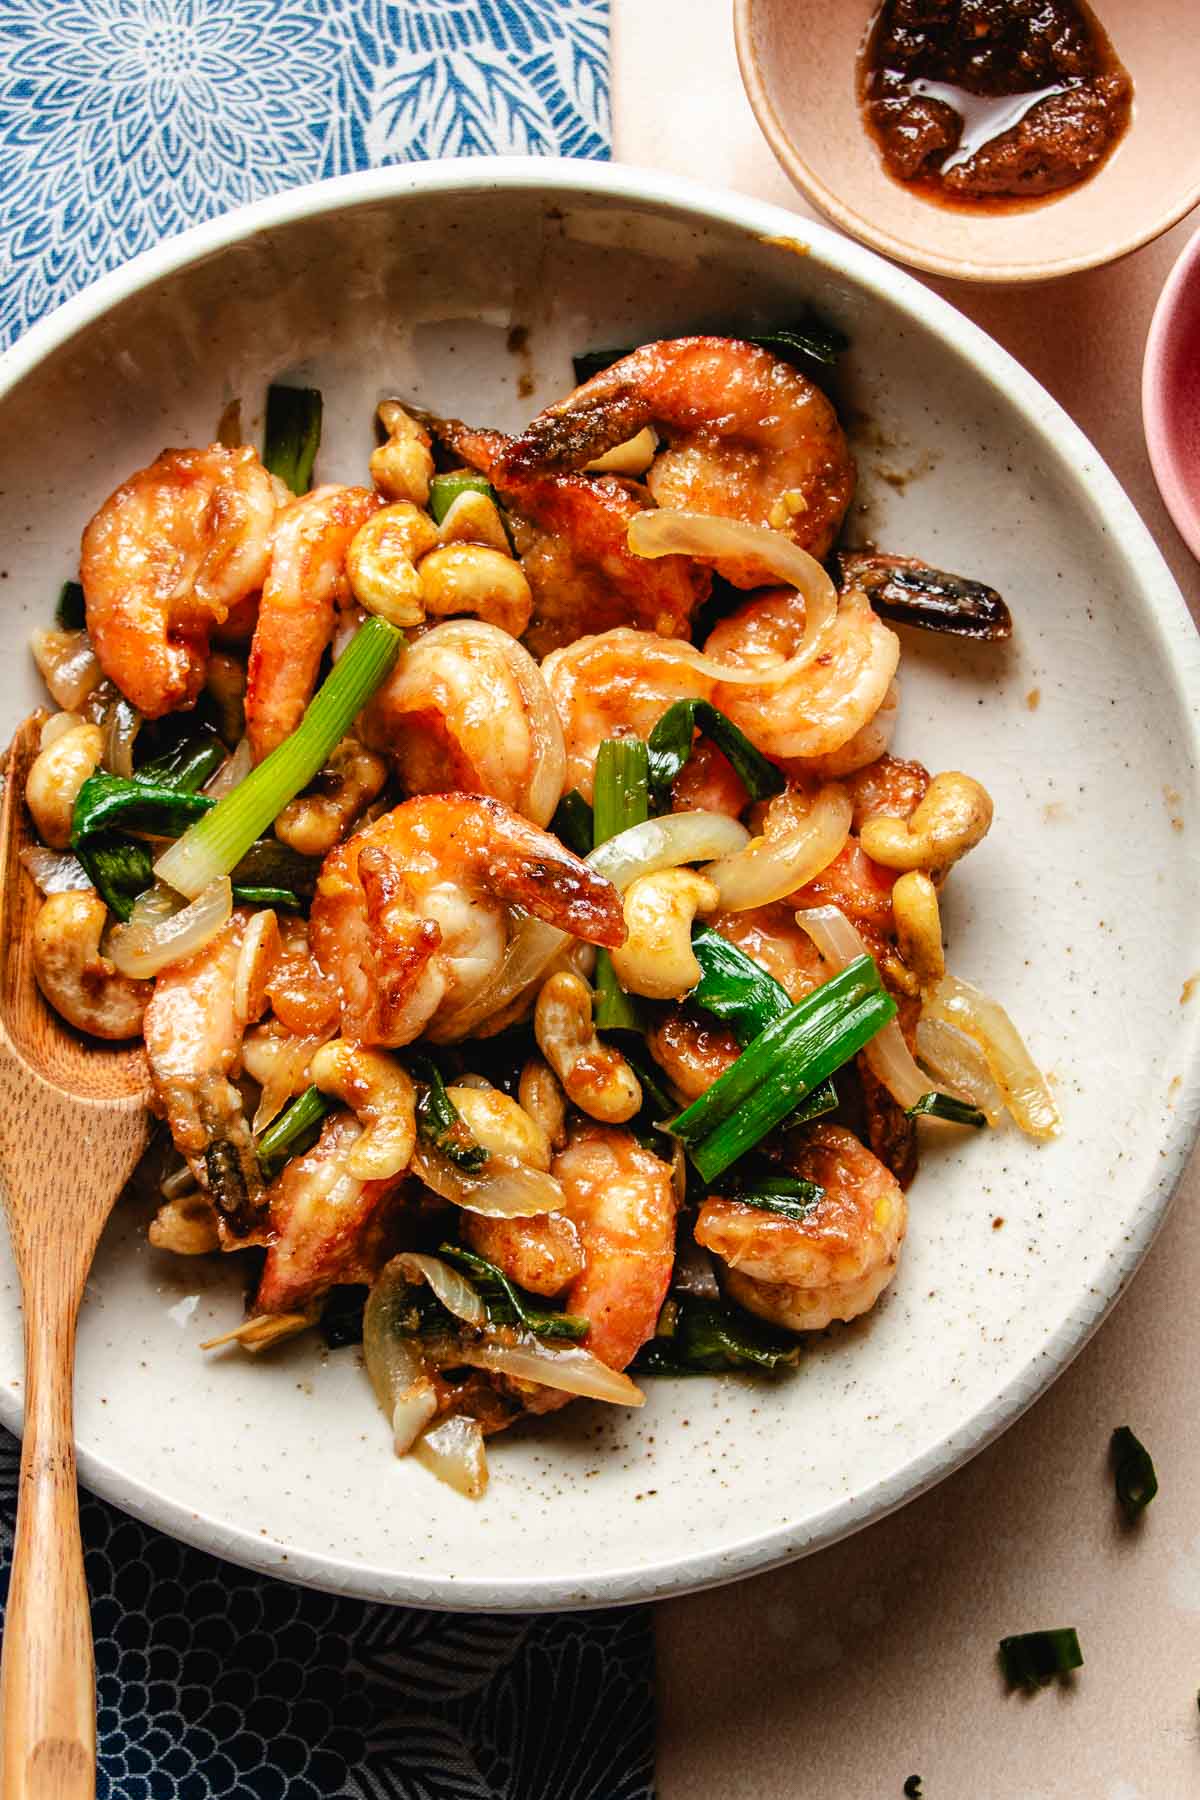 An overhead image shows shrimp stir fried in sha cha sauce with cashew nuts.